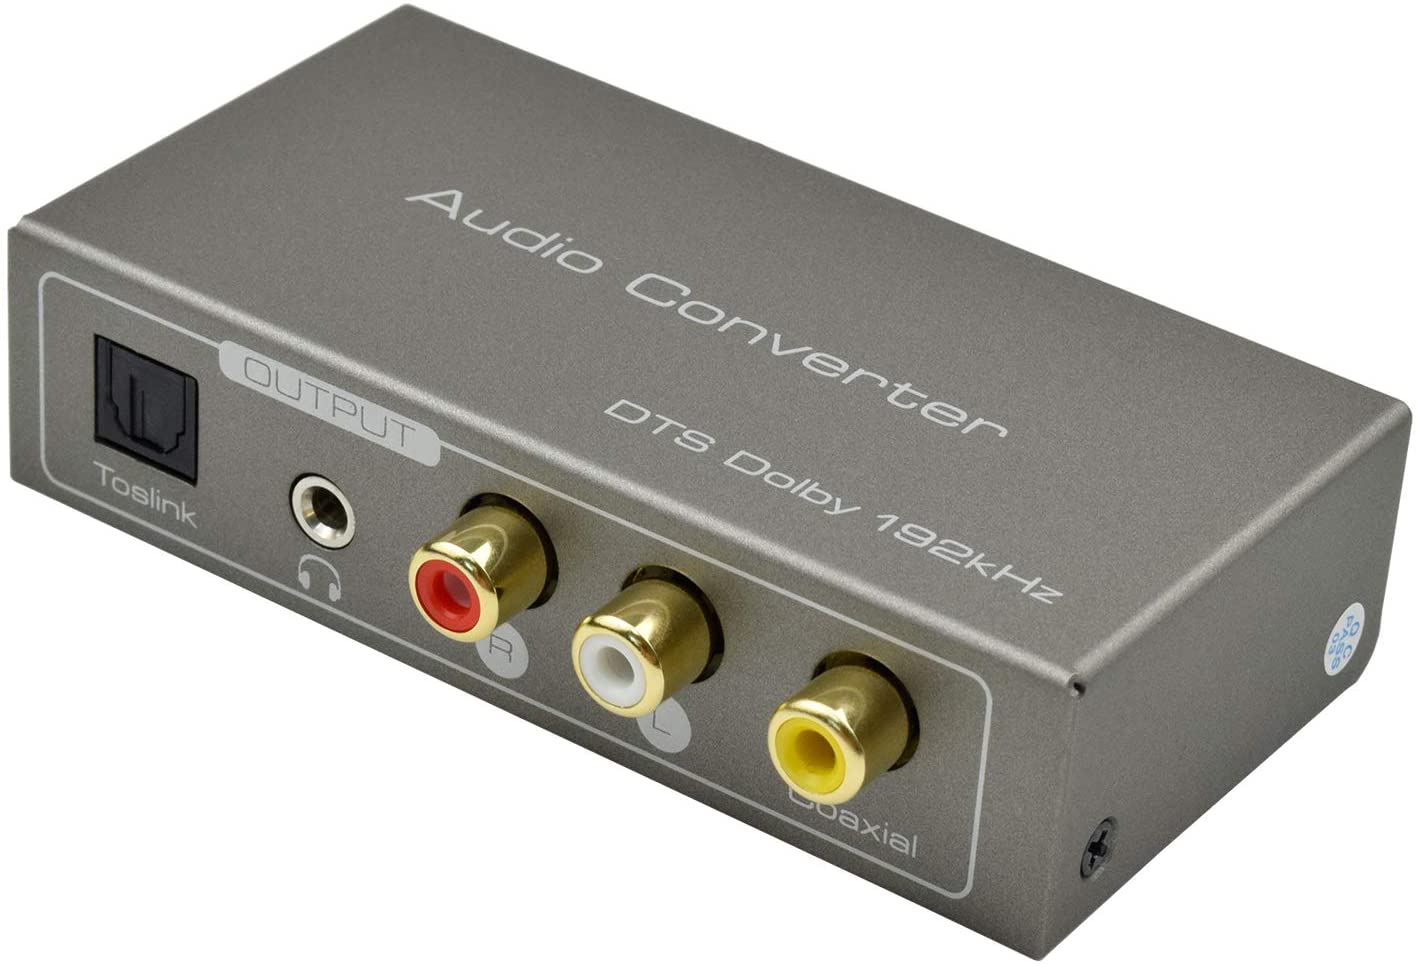 HDMI ARC Audio Adapter,Musou 192KHZ HDMI ARC Audio Extractor HDMI ARC or Digital Optical Toslink Coaxial to Optical or Analog 3.5mm L/R Stereo Audio Splitter